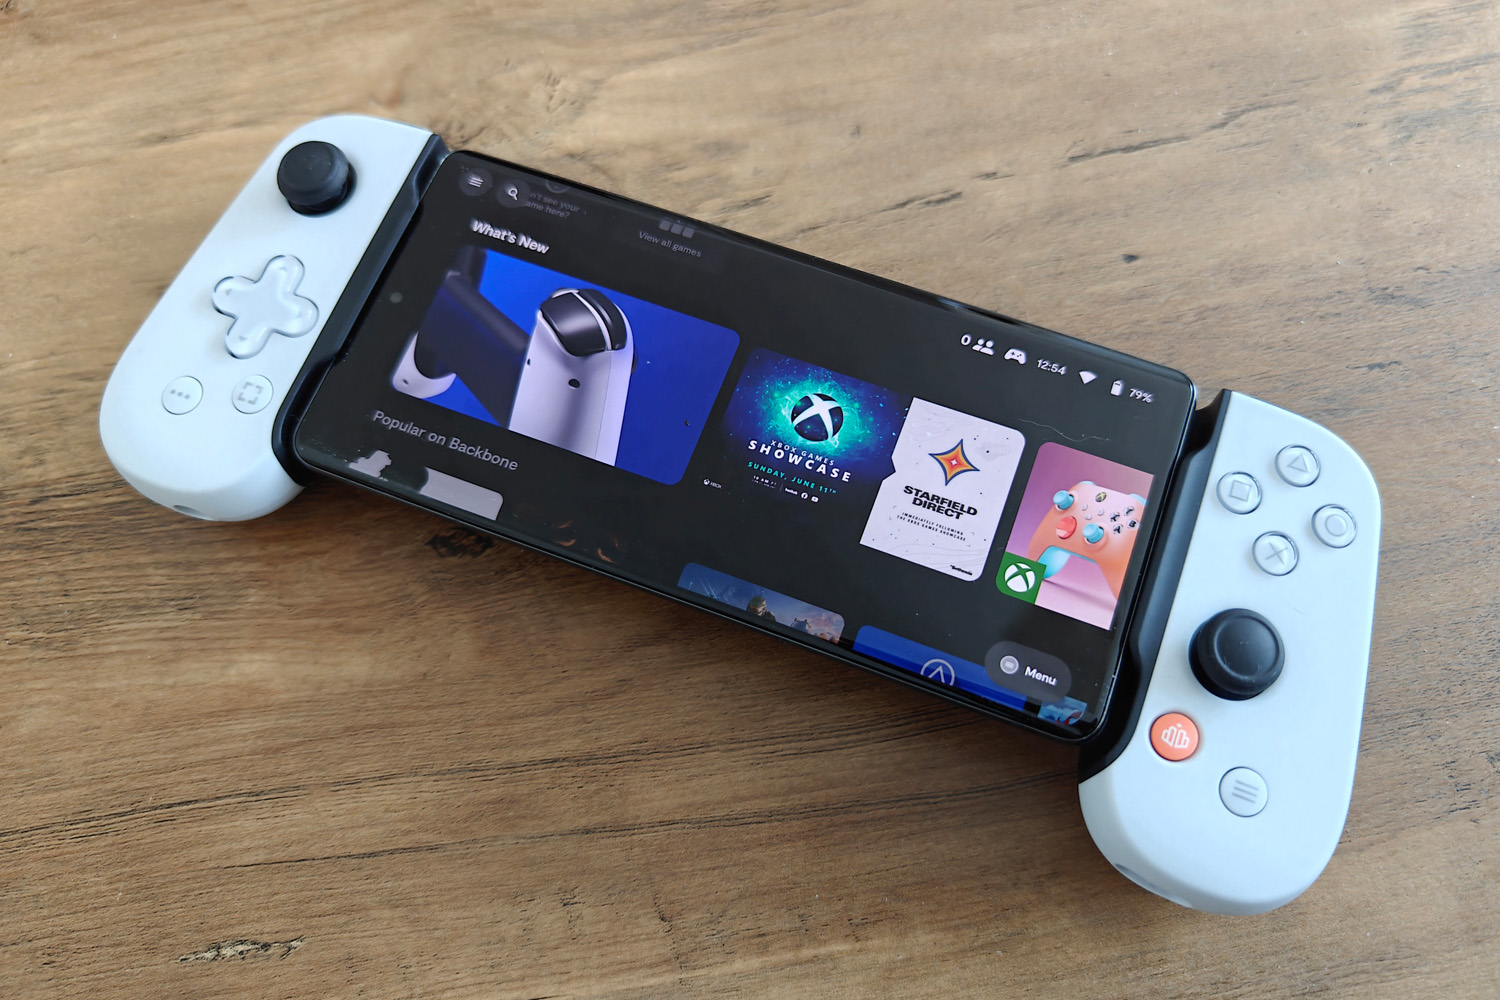 Backbone One's Gaming Controller Now Supports Android